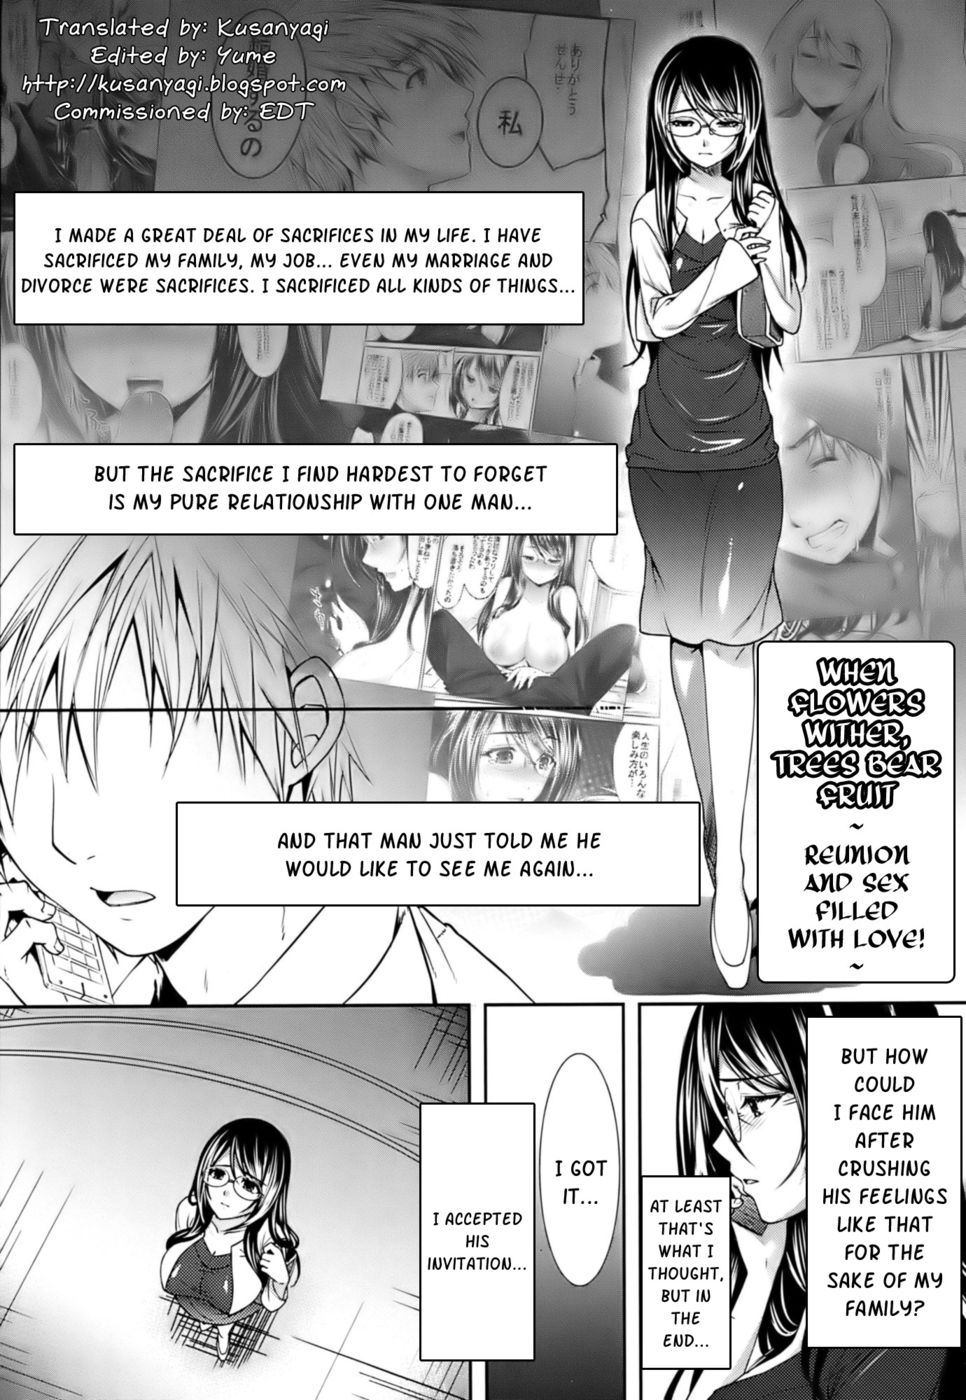 Hentai Manga Comic-When Flowers Wither, Trees Bear Fruit-Read-1